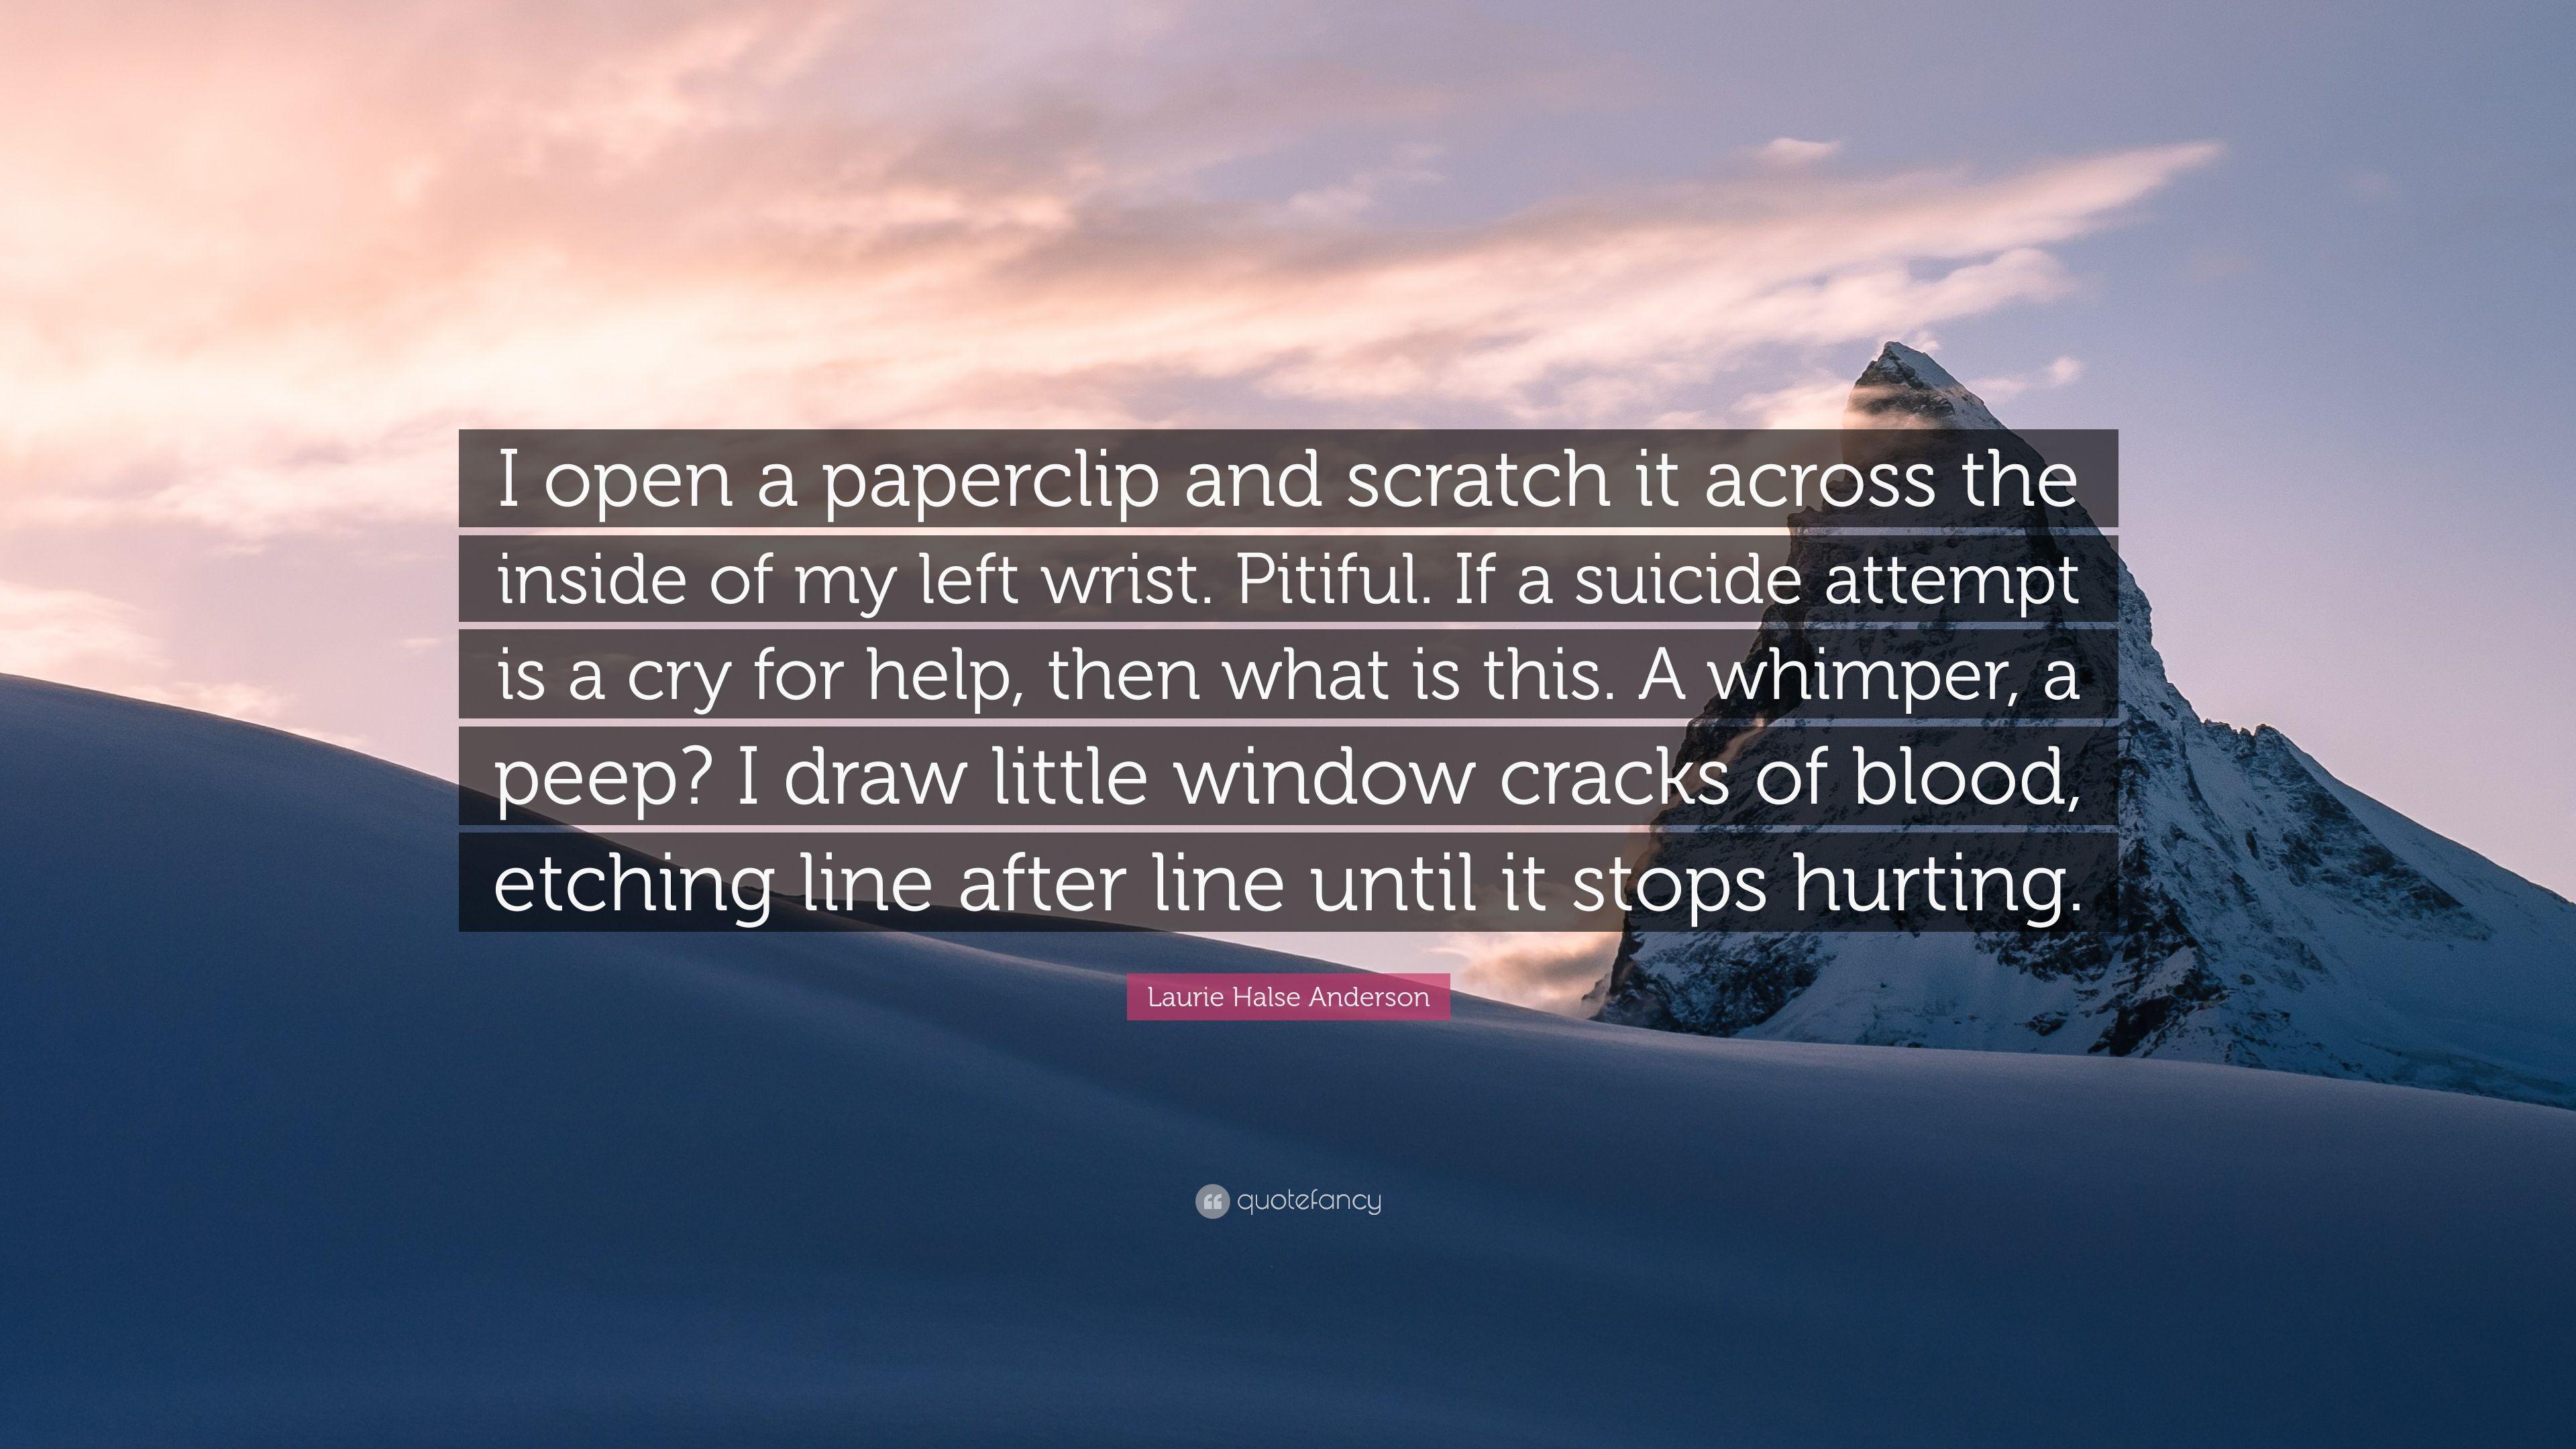 Laurie Halse Anderson Quote: “I open a paperclip and scratch it